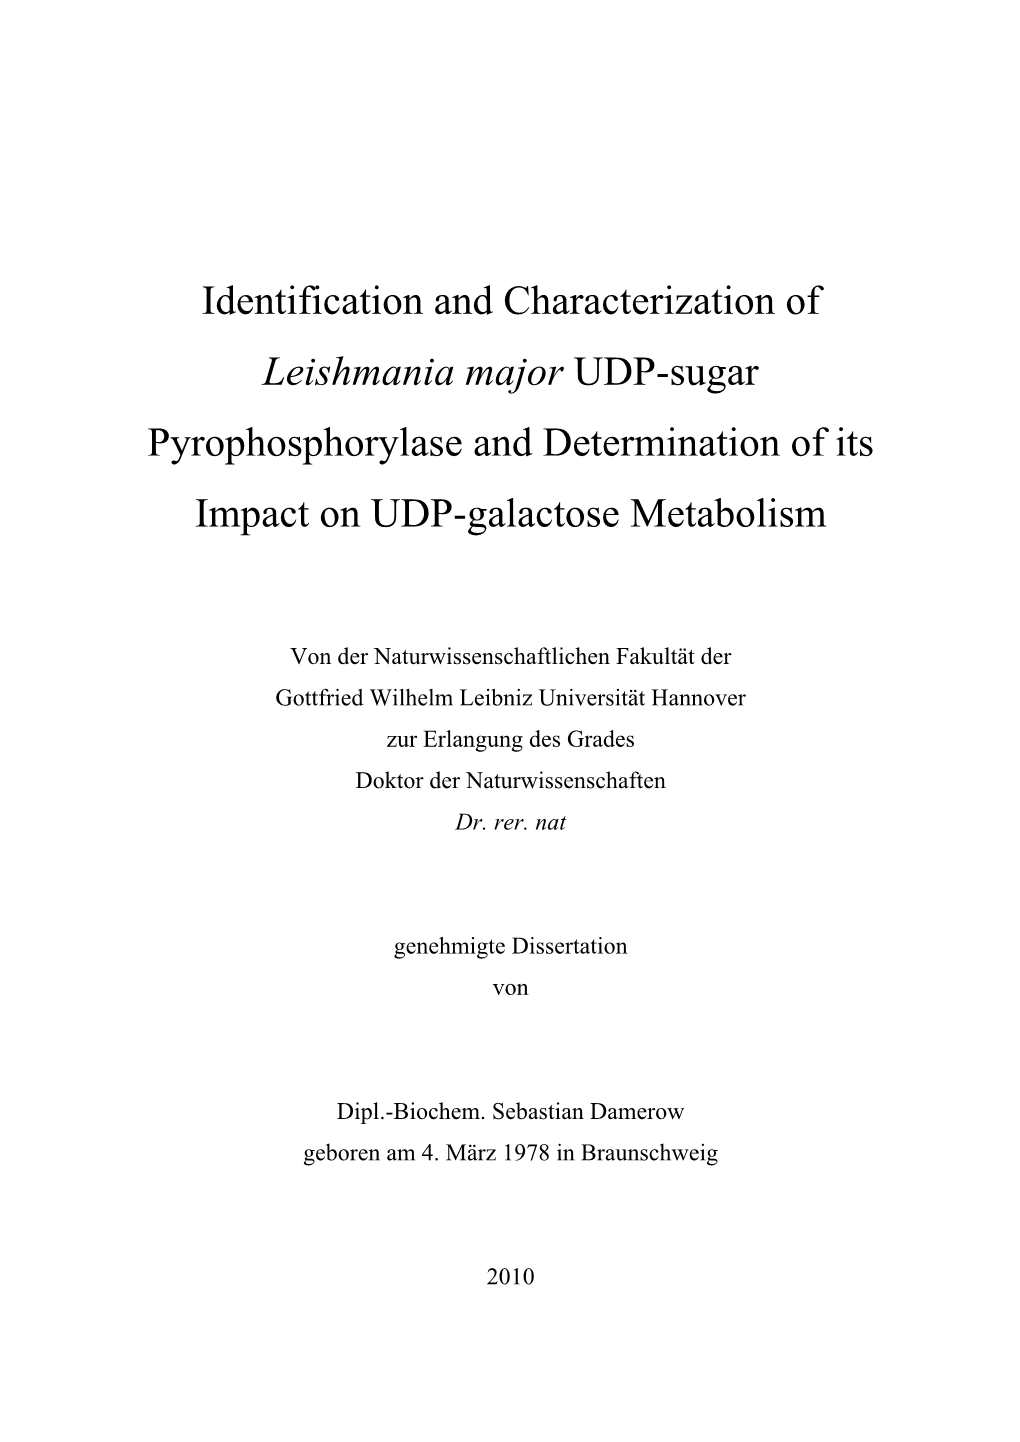 Identification and Characterization of Leishmania Major UDP-Sugar Pyrophosphorylase and Determination of Its Impact on UDP-Galactose Metabolism